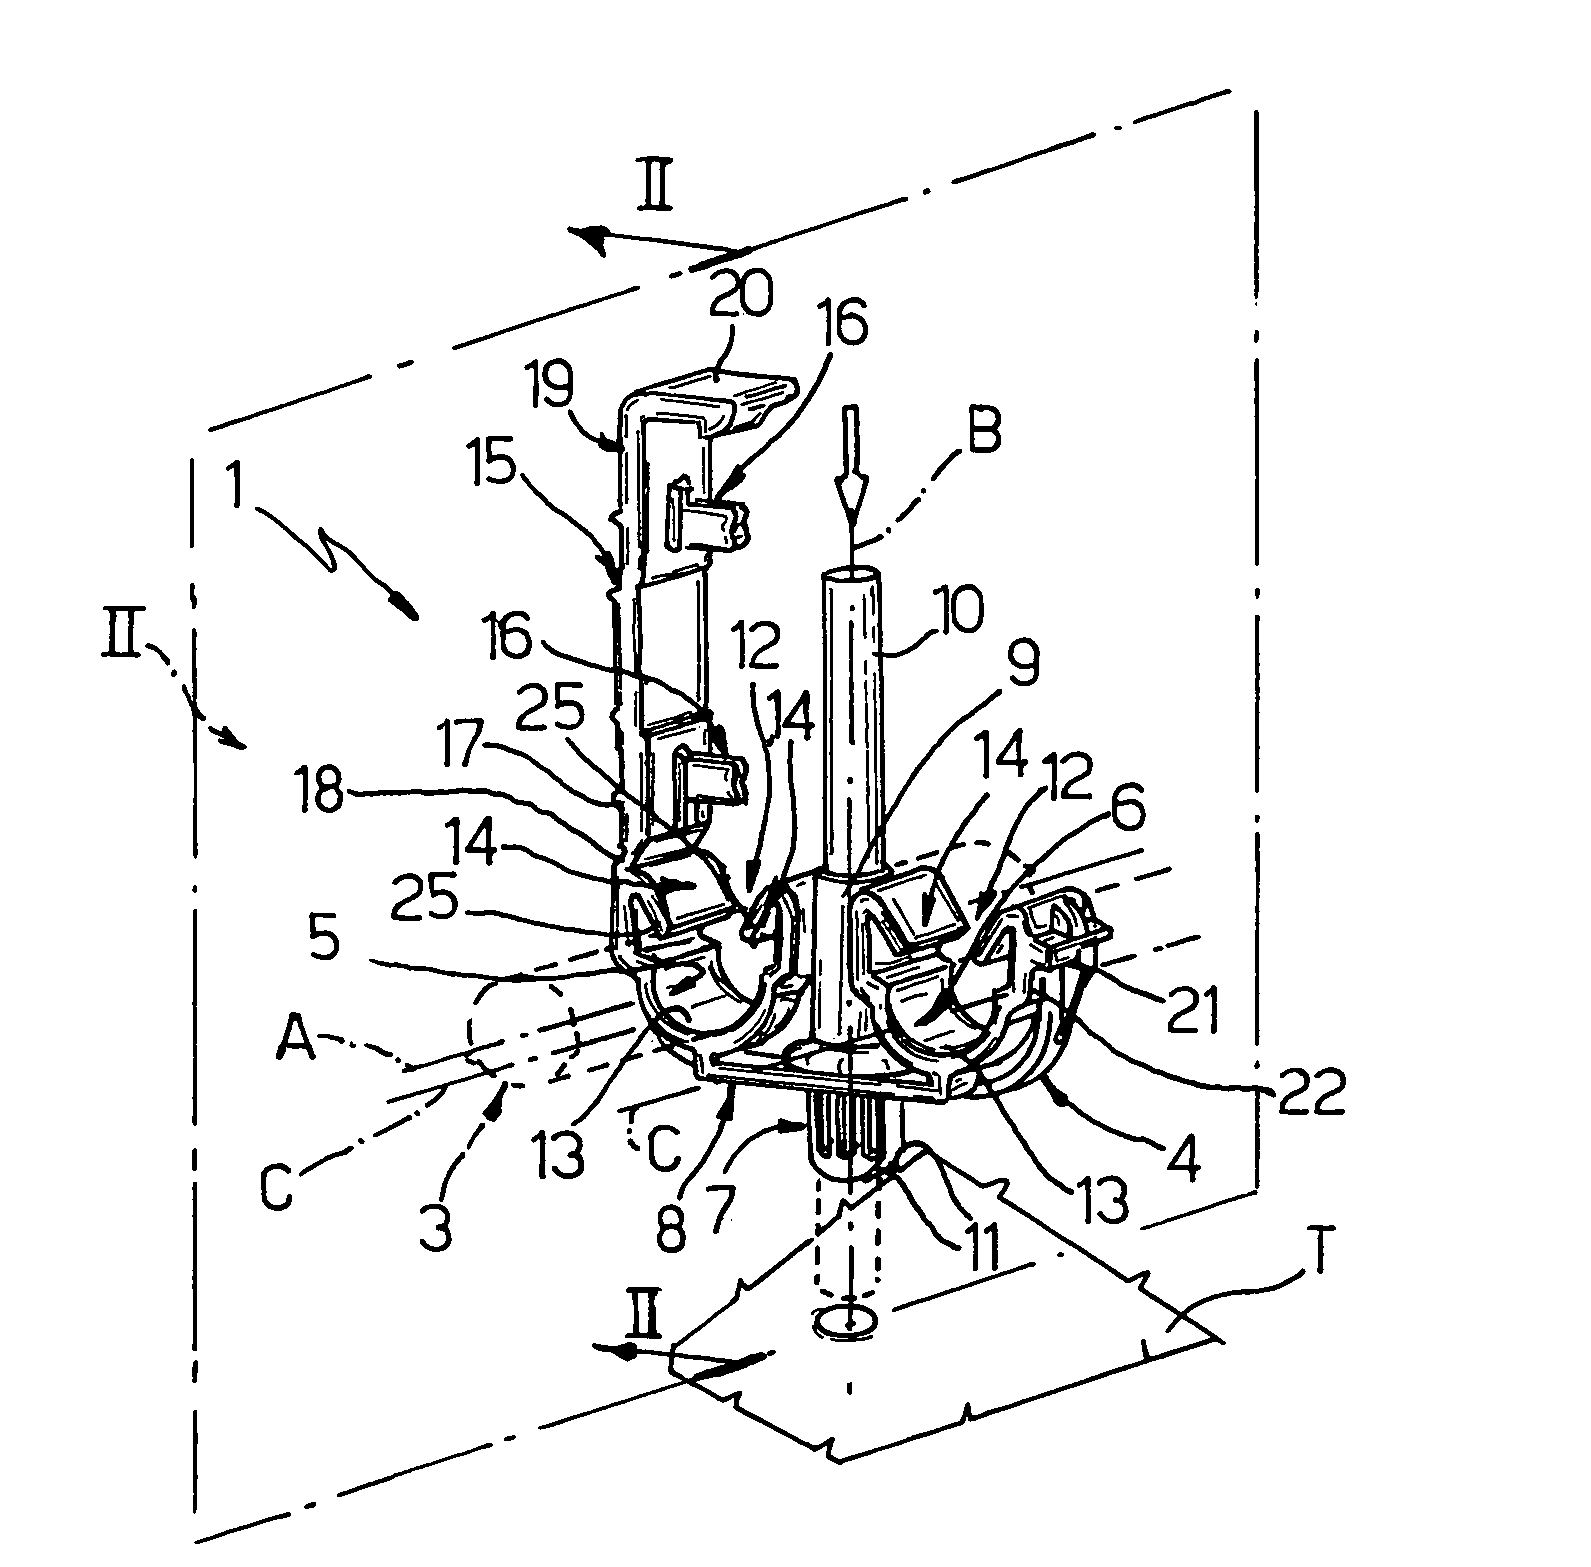 Clamp-type retention element for axisymmetrical components such as cables or tubes, in particular for application on vehicles